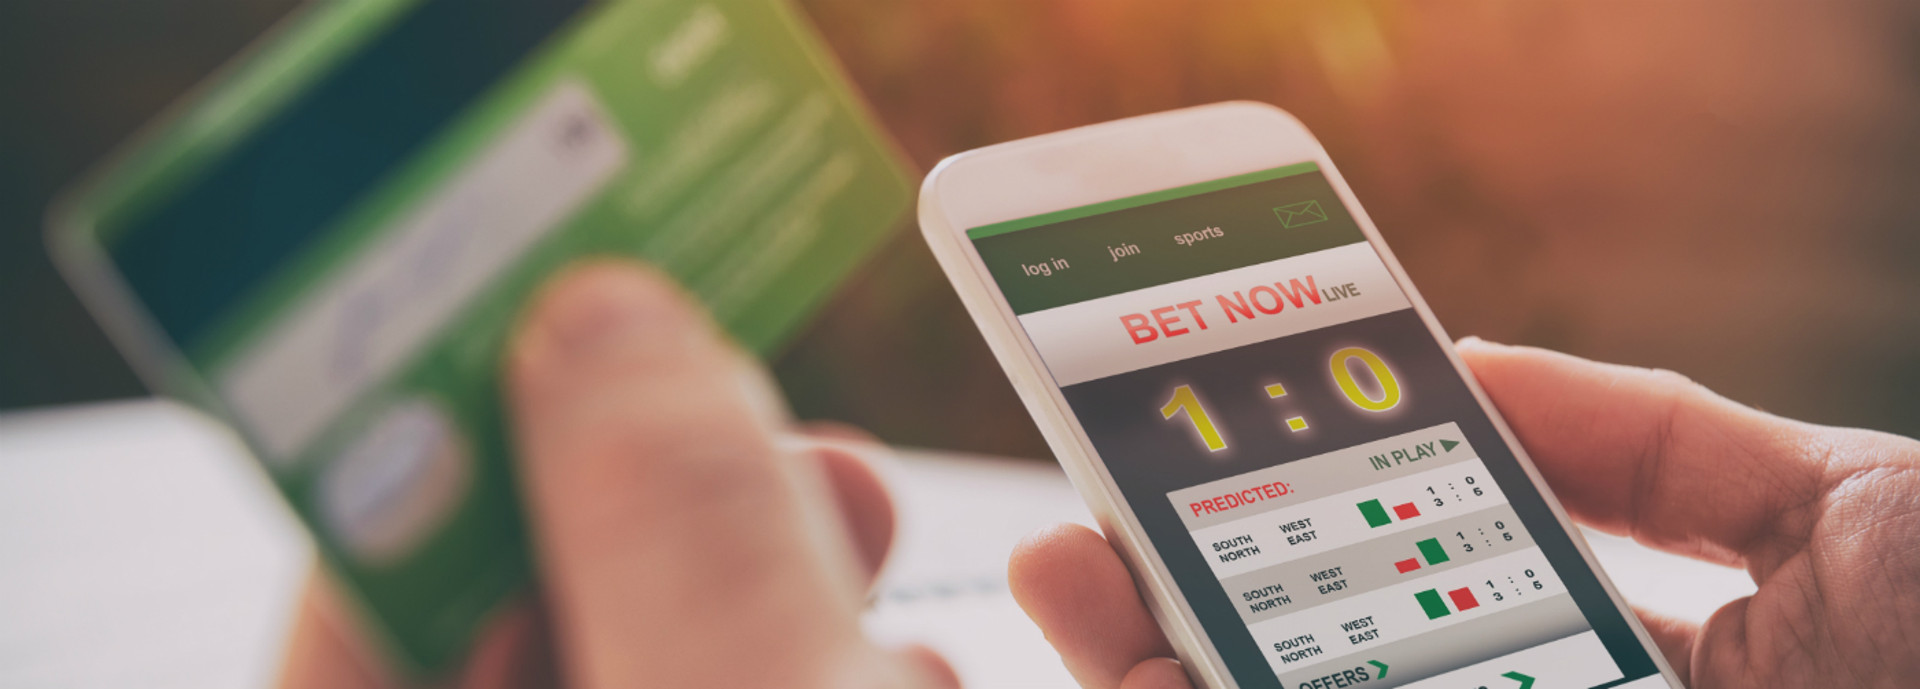 An image of a gambling app on a mobile phone